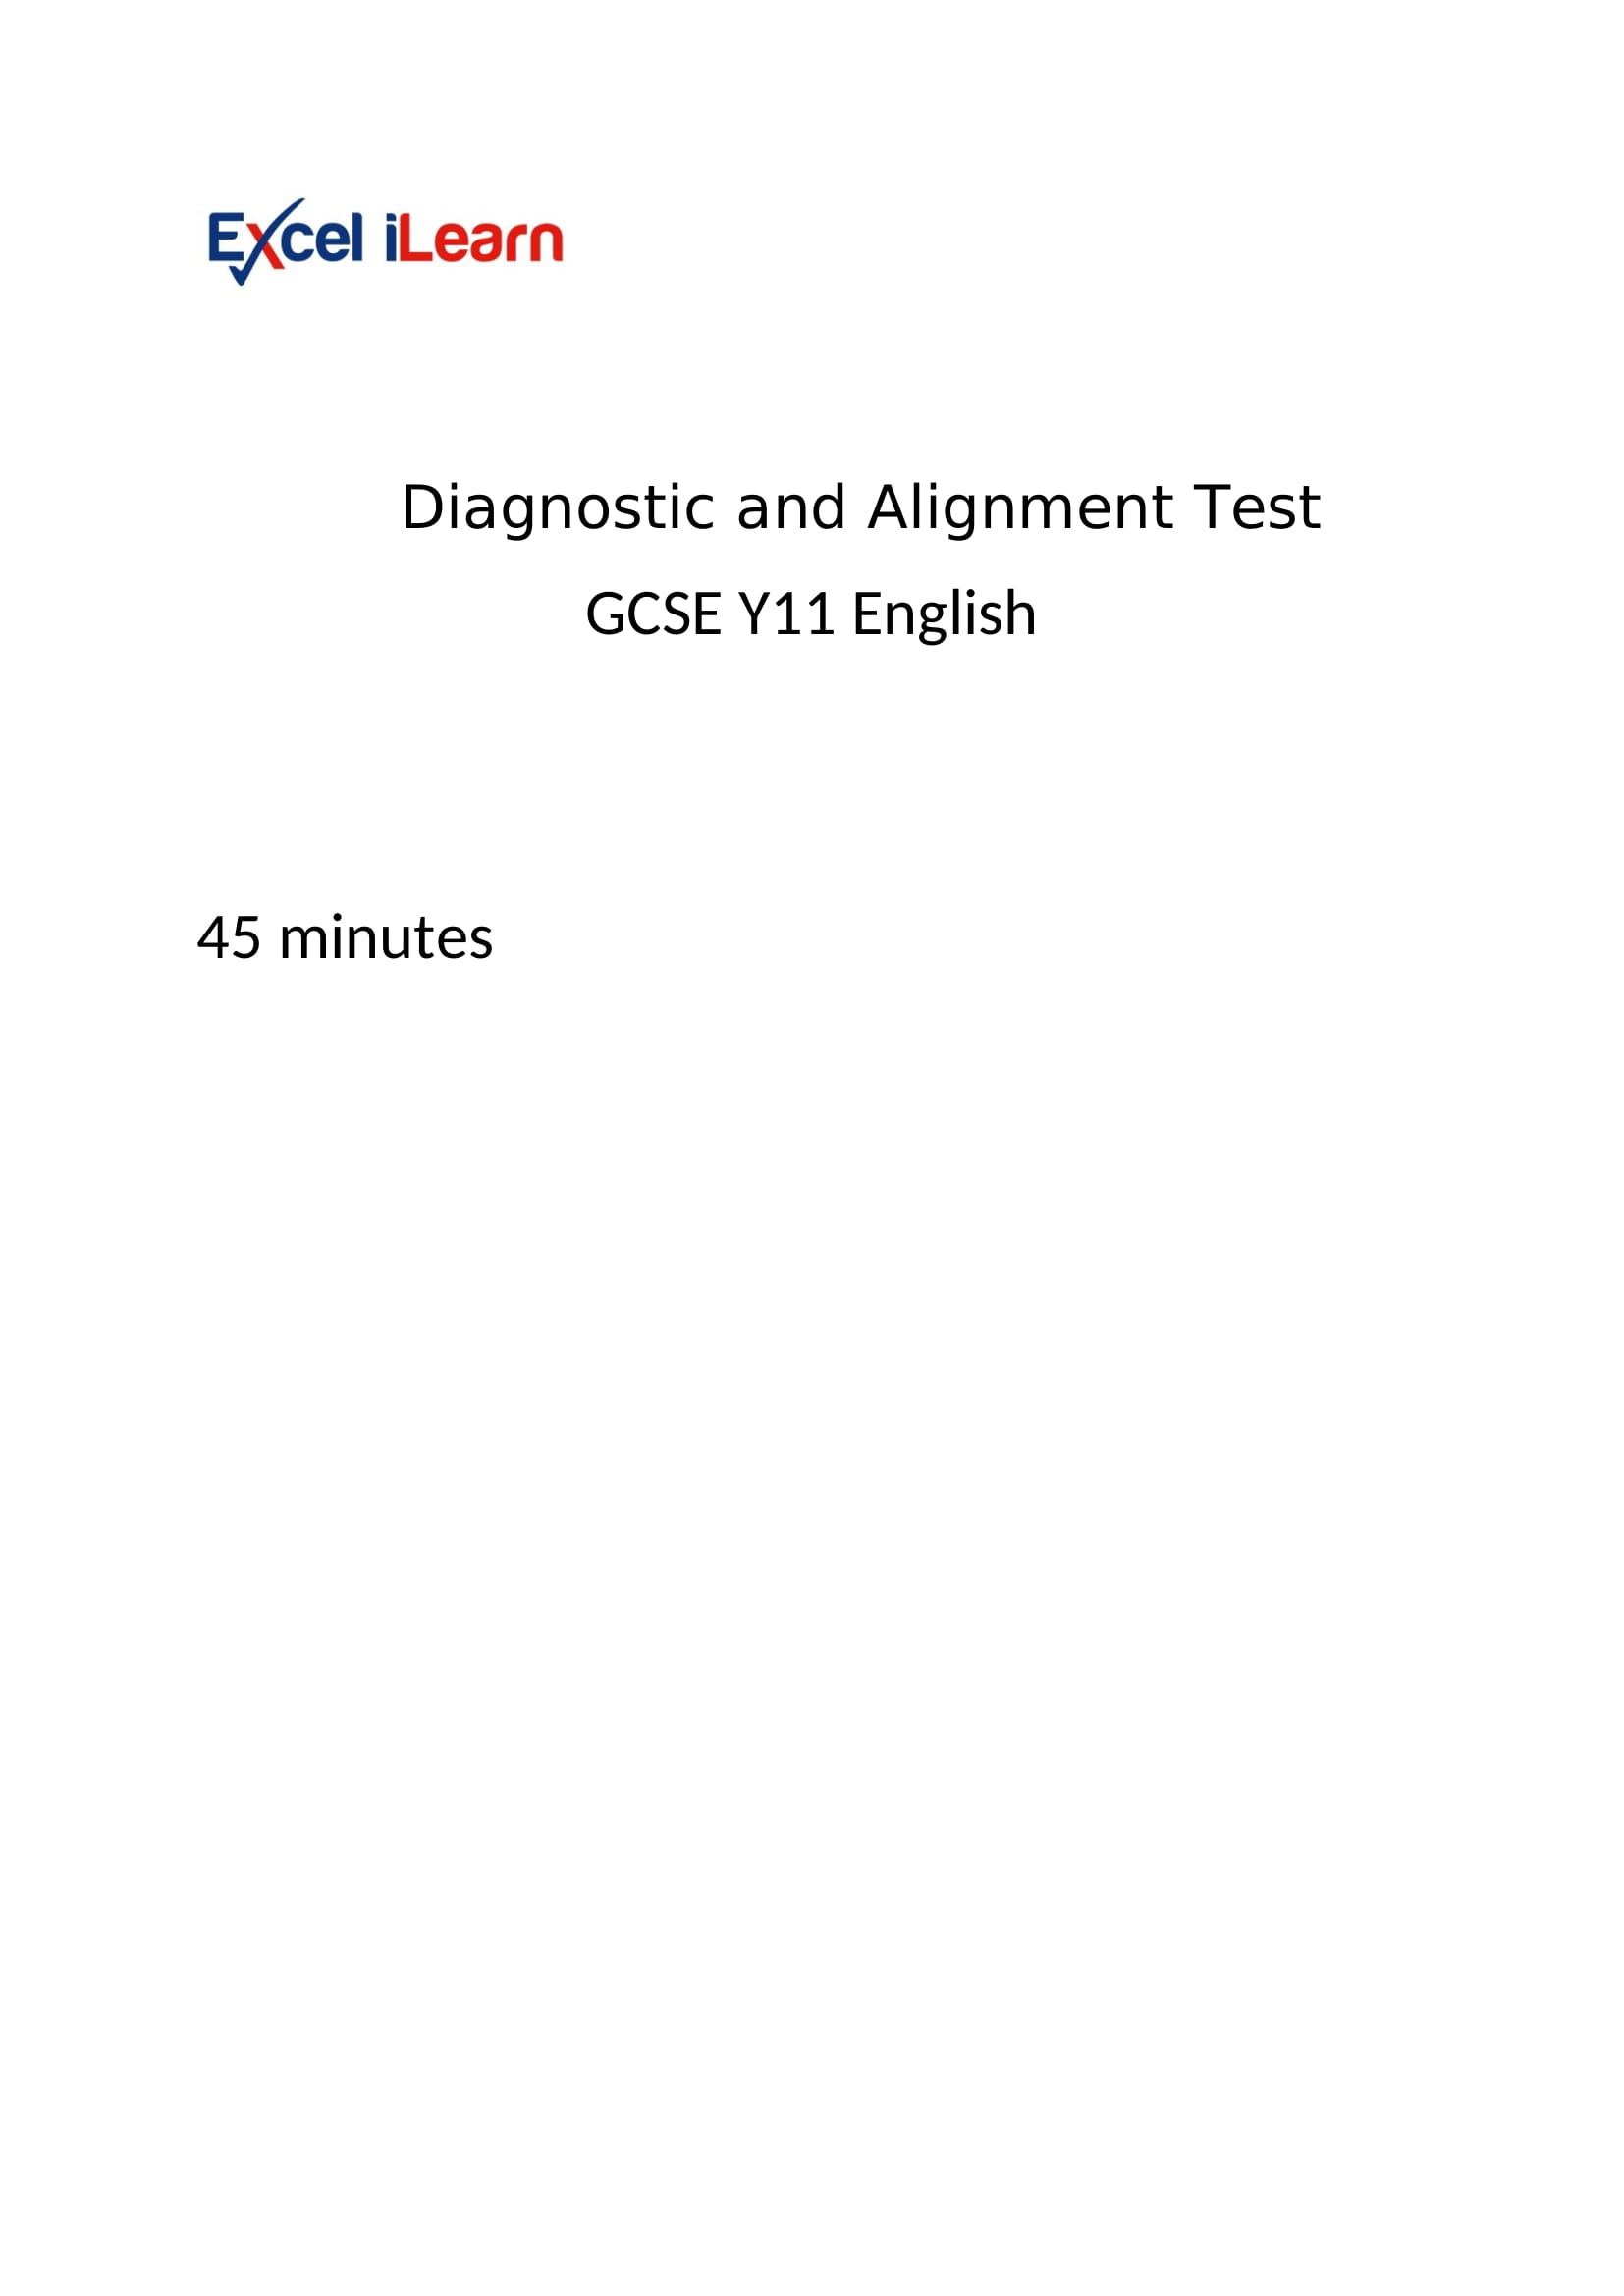 GCSE_Y11_English_Diagnostic and Alignment Test 2021-1